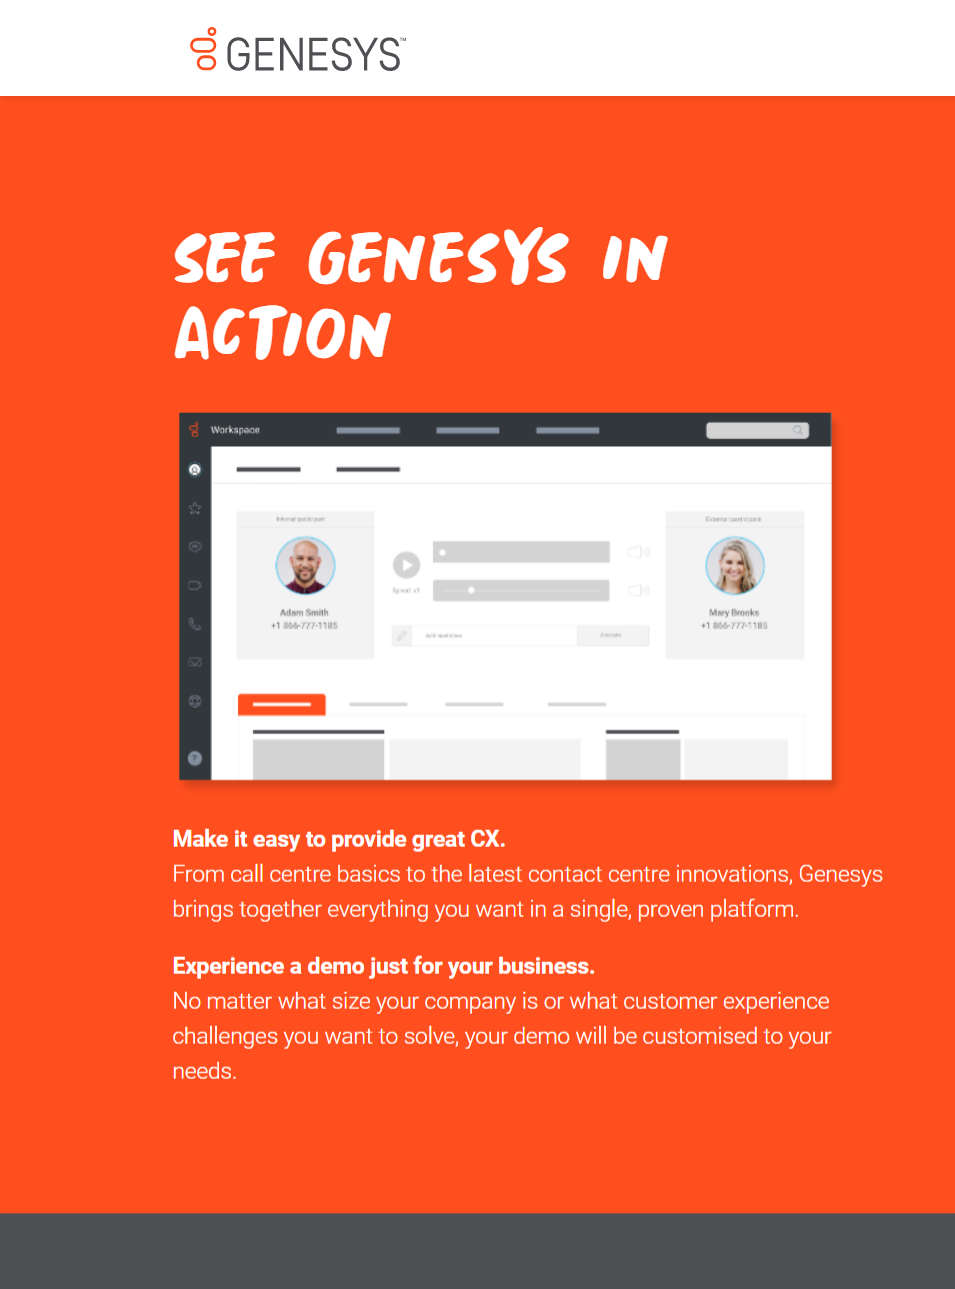 See Genesys in action